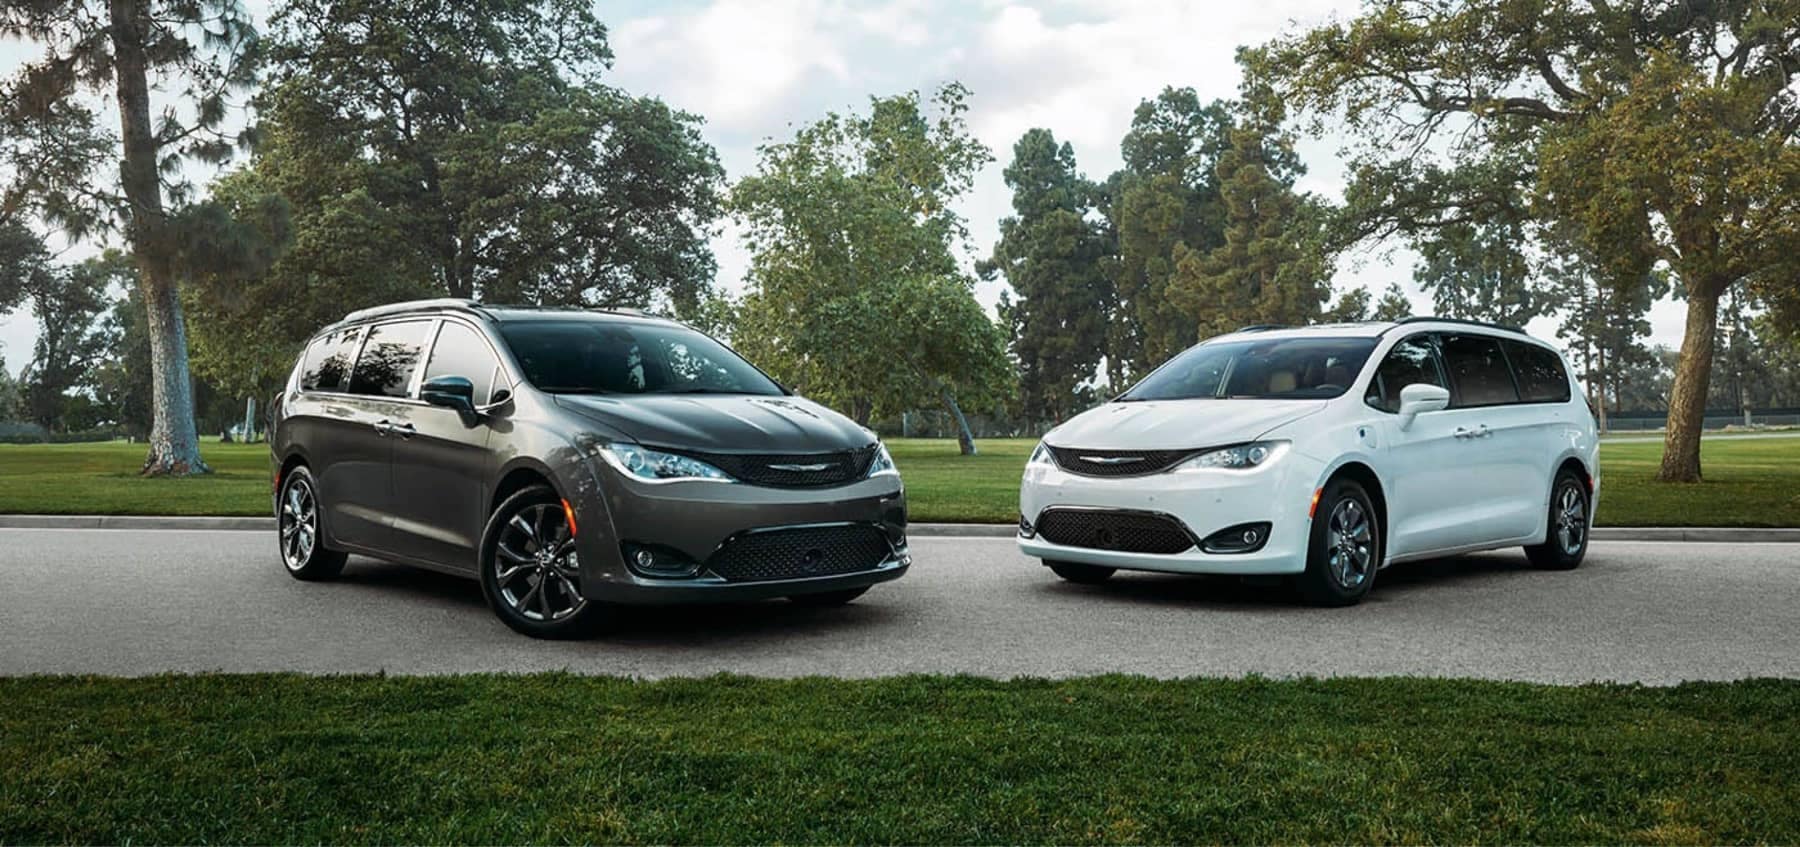 2020 Chrysler Pacificas parked in front of trees